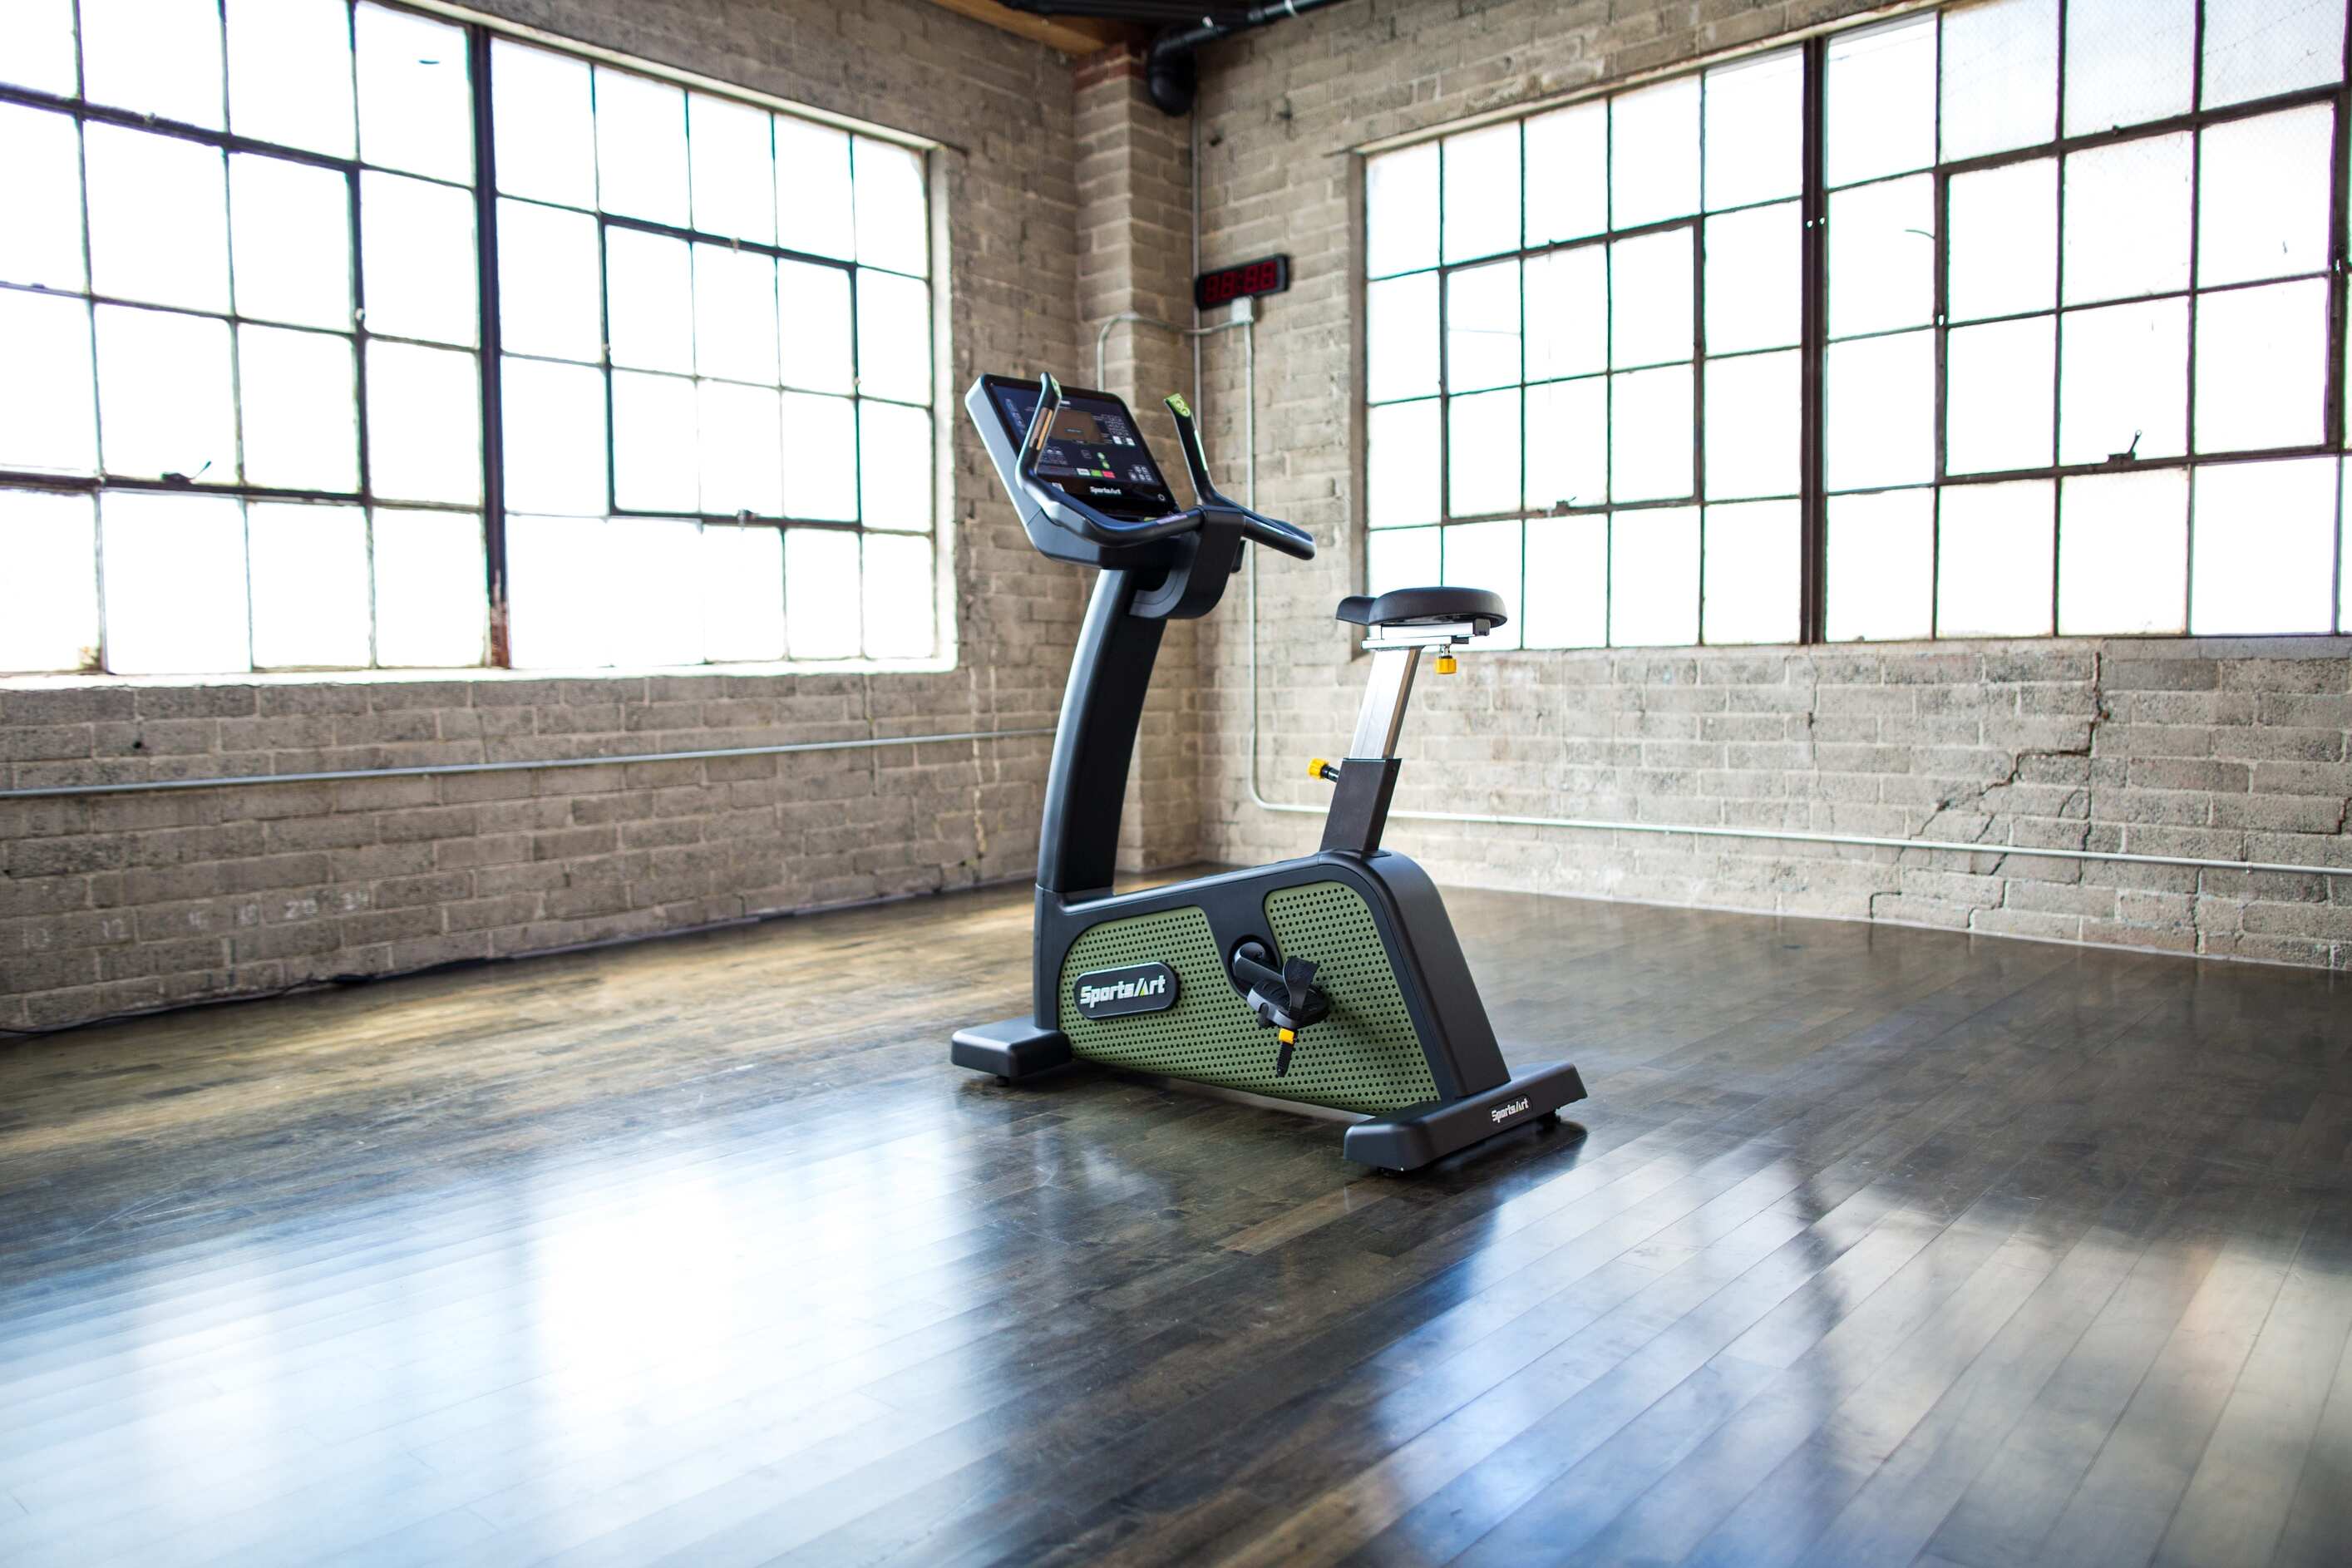 SportsArt Status Eco-Powr Upright Cycle G576U side view inside a home gym setting 